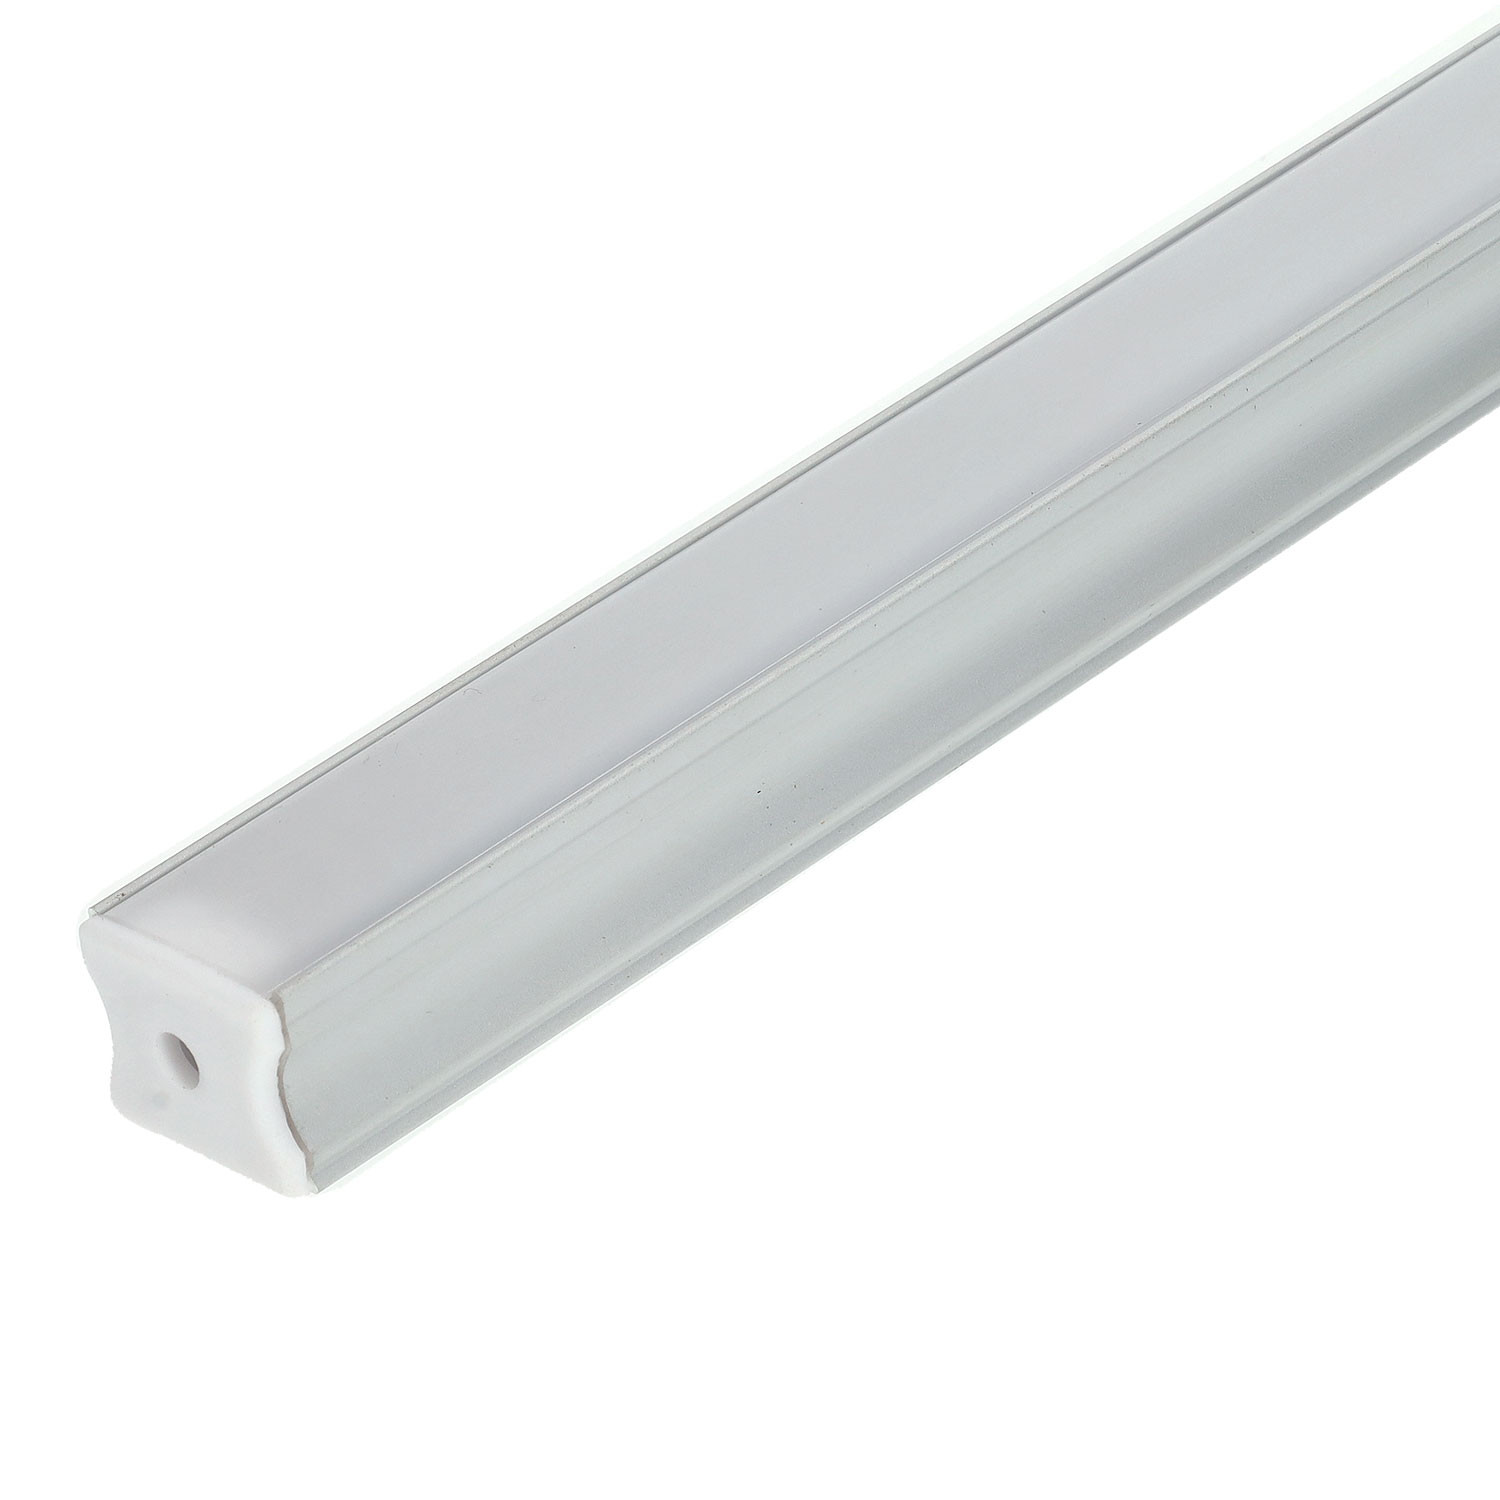 Profile for 2 m LED Strips...